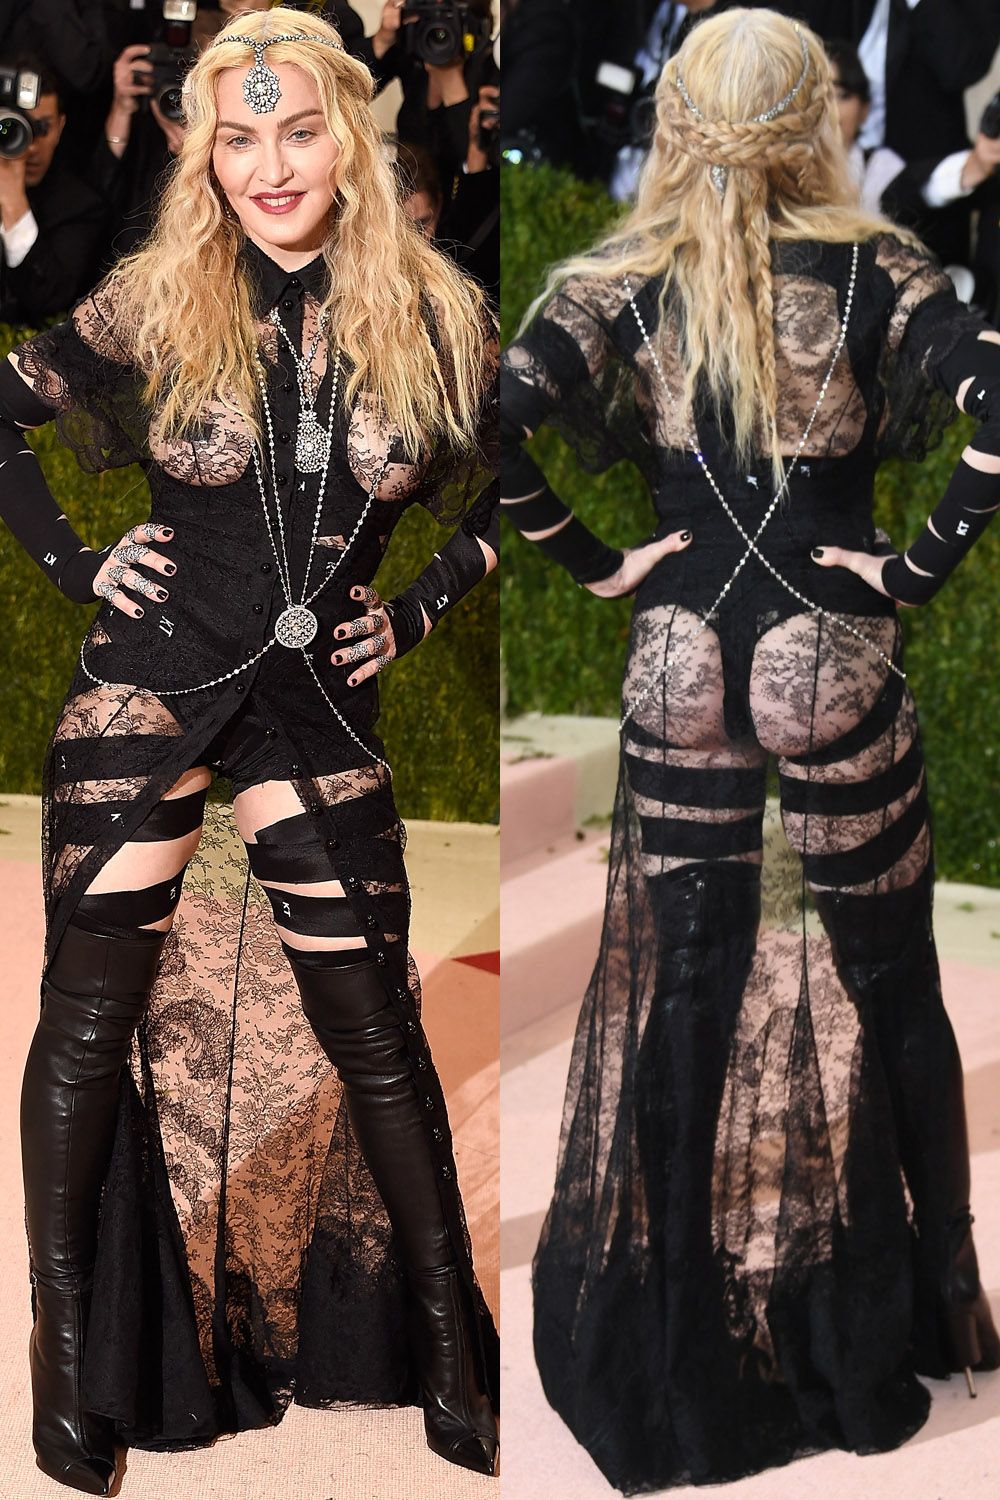 42 Craziest Met Gala Dresses of All Time - Outrageous Met Gala Red Carpet  Photos